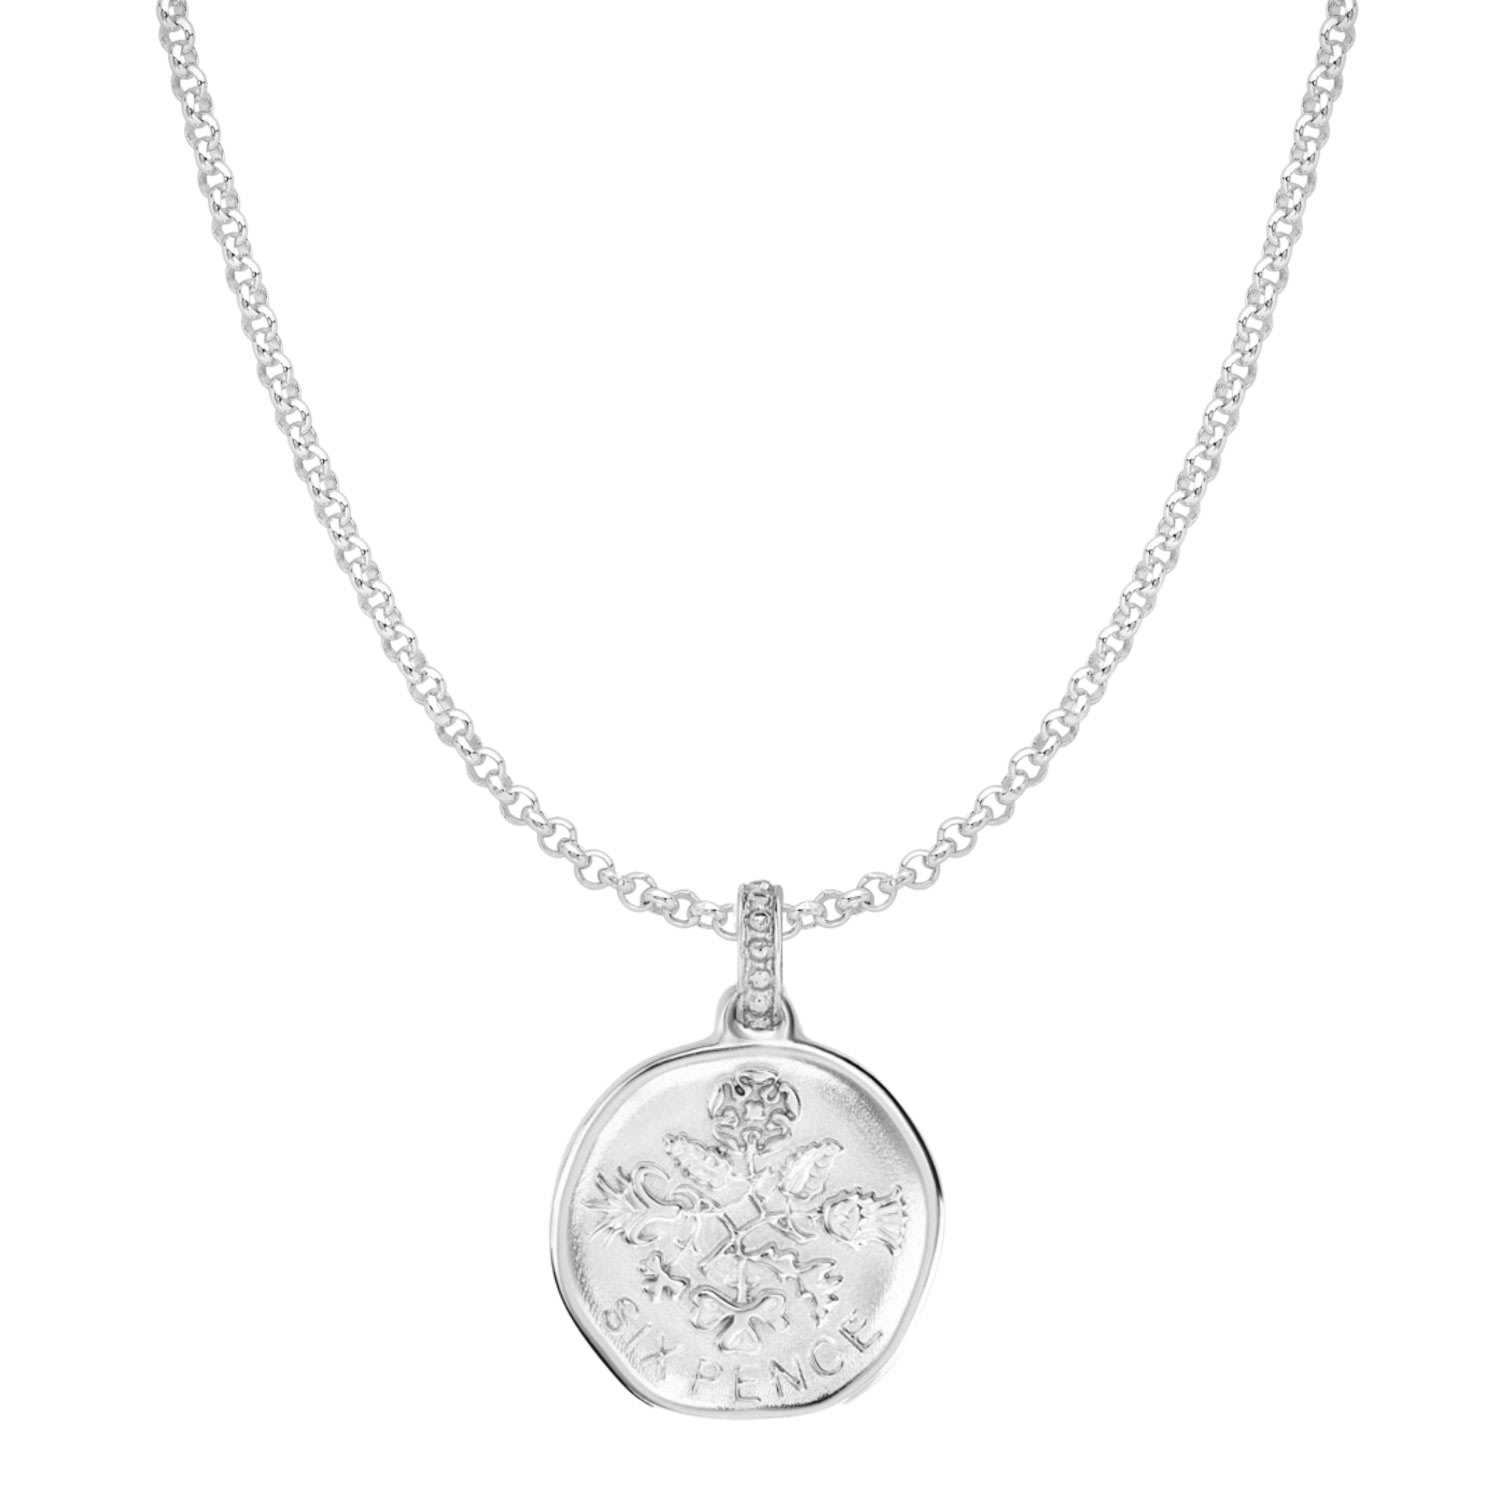 Silver Men's Sixpence Story Necklace Dower & Hall